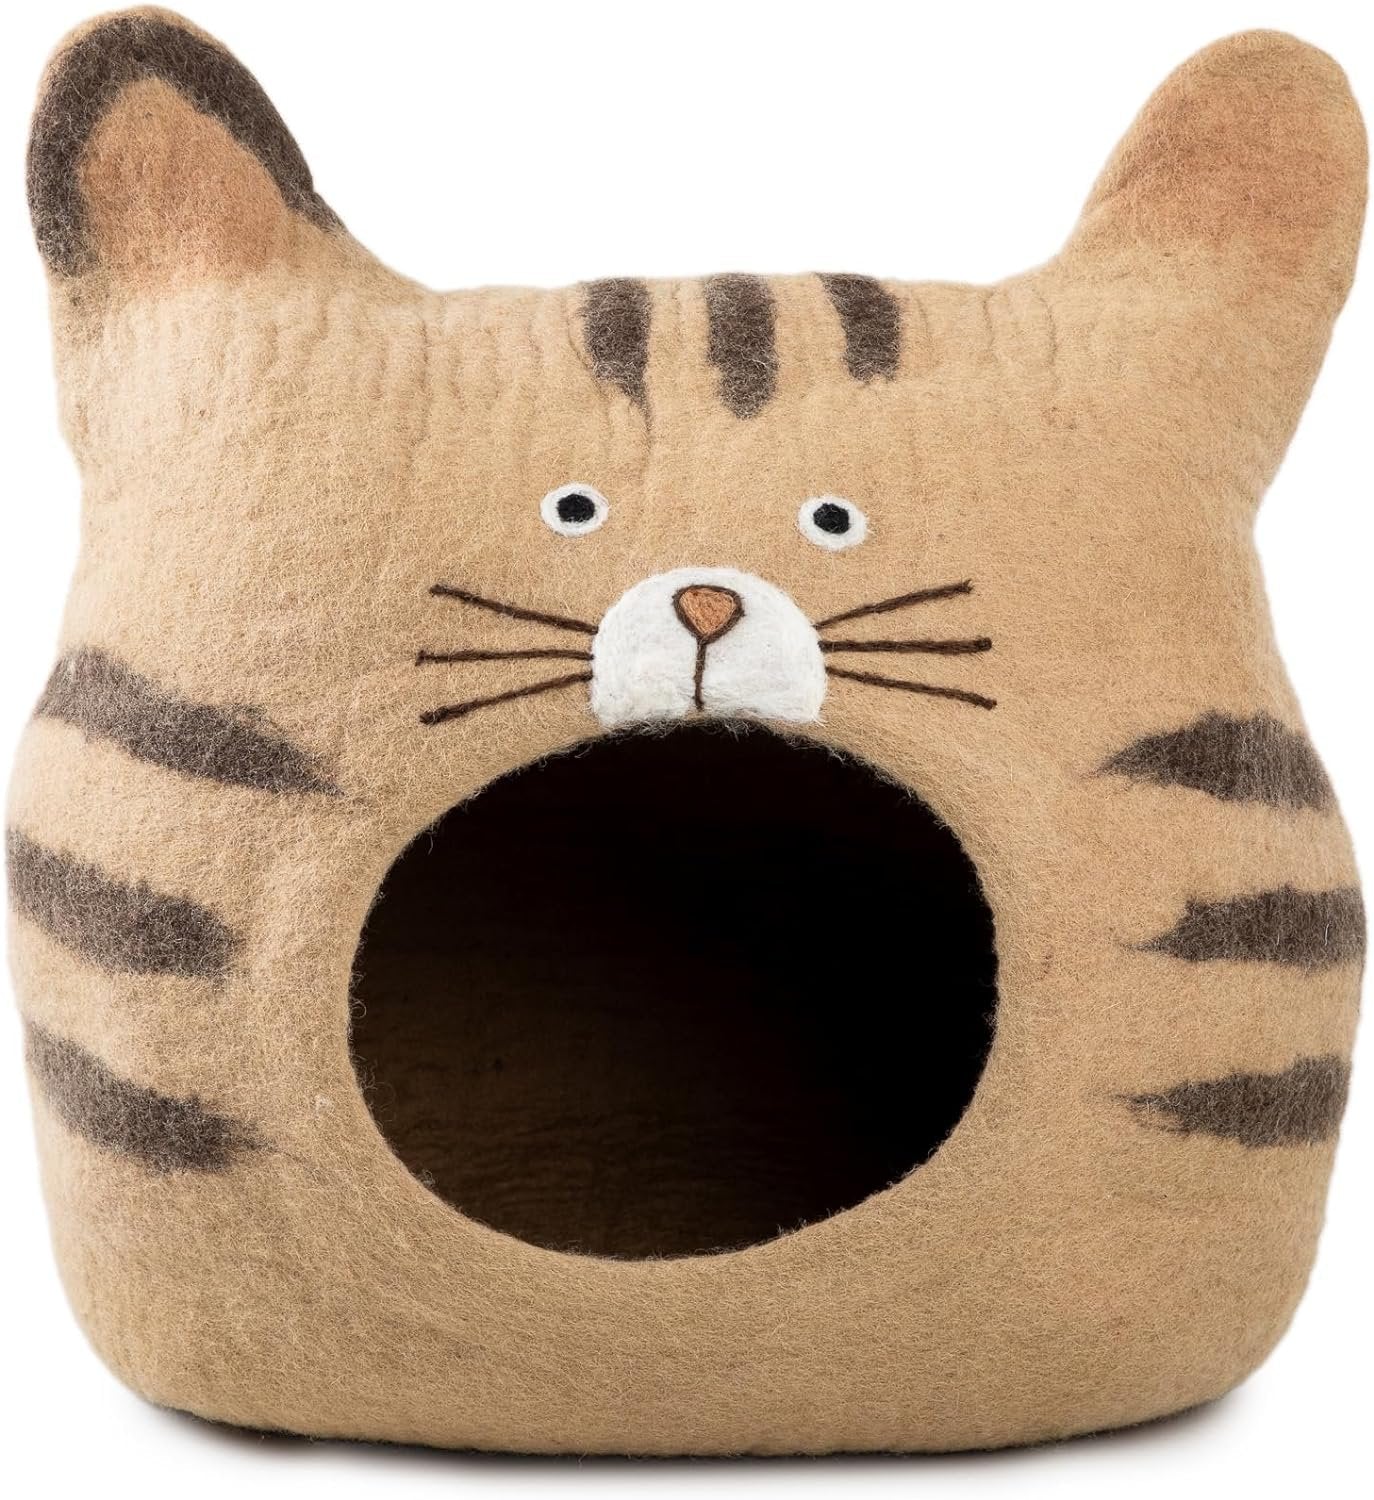 Woolygon Wool Cat Cave Bed - Cozy Cat Face Bed Handcrafted 100% Merino Wool, Eco-Friendly Felt Cat Cave for Indoor Cats and Kittens